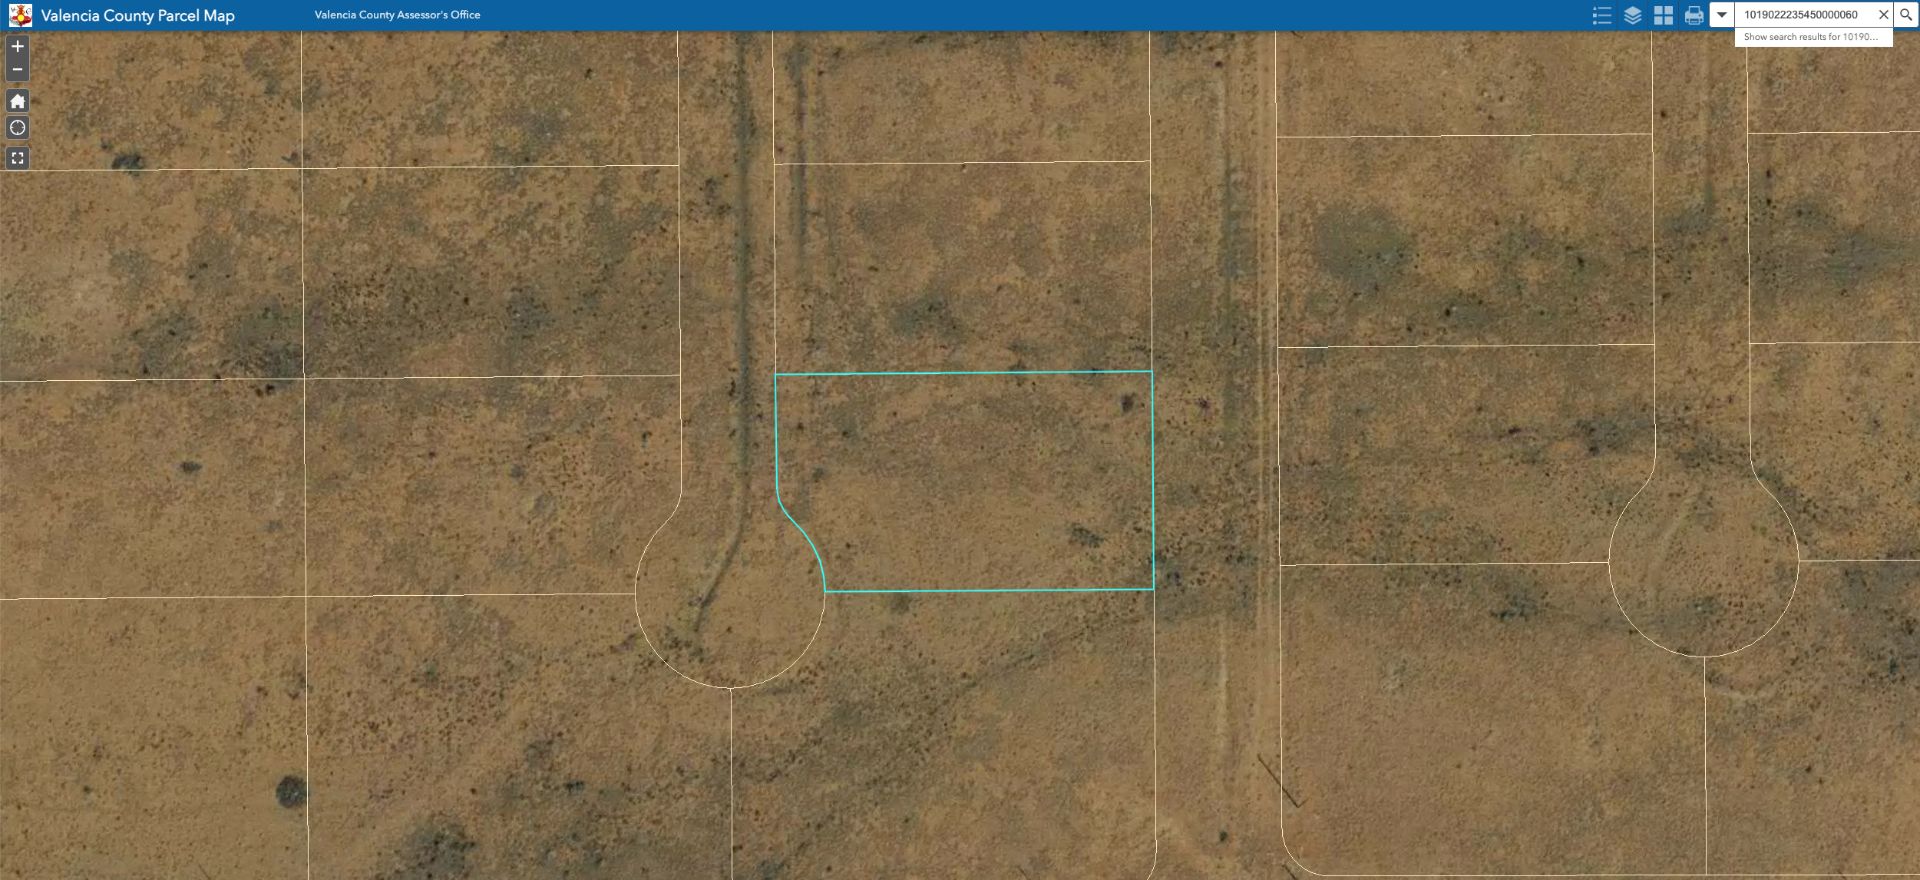 Quarter-Acre Lot Near the Mountains in New Mexico! - Image 2 of 7